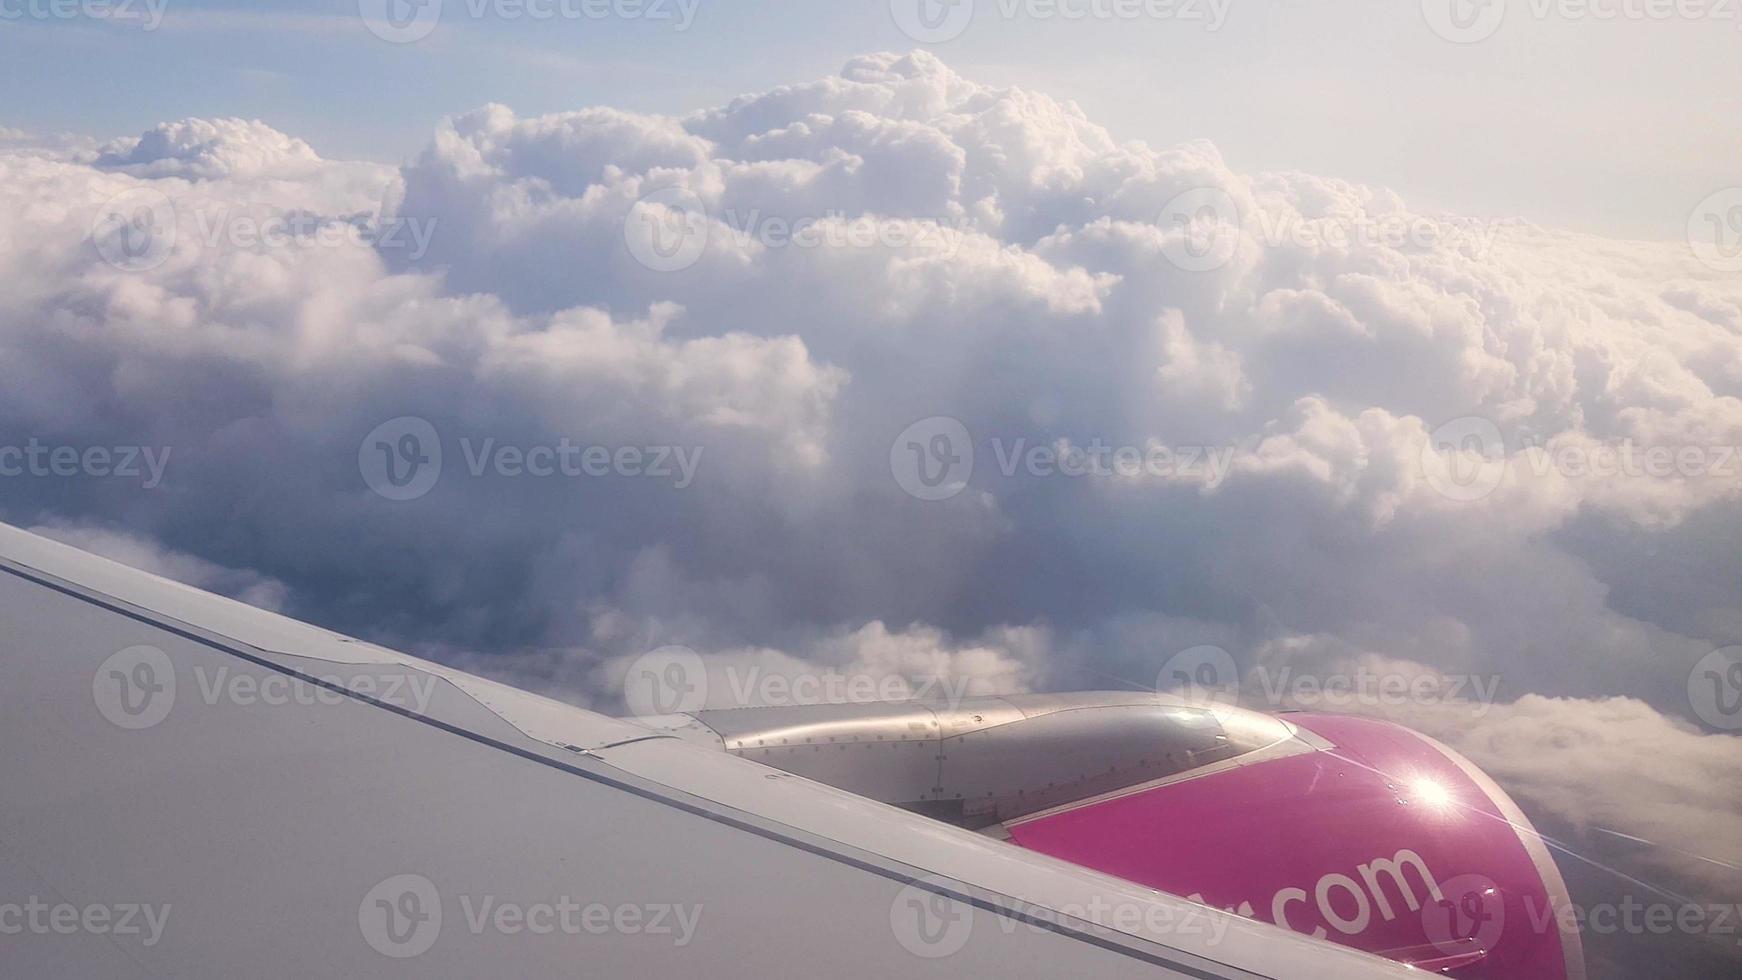 Flying over the clouds. View from plane aircraft passenger window with clouds and skyline horizon. photo